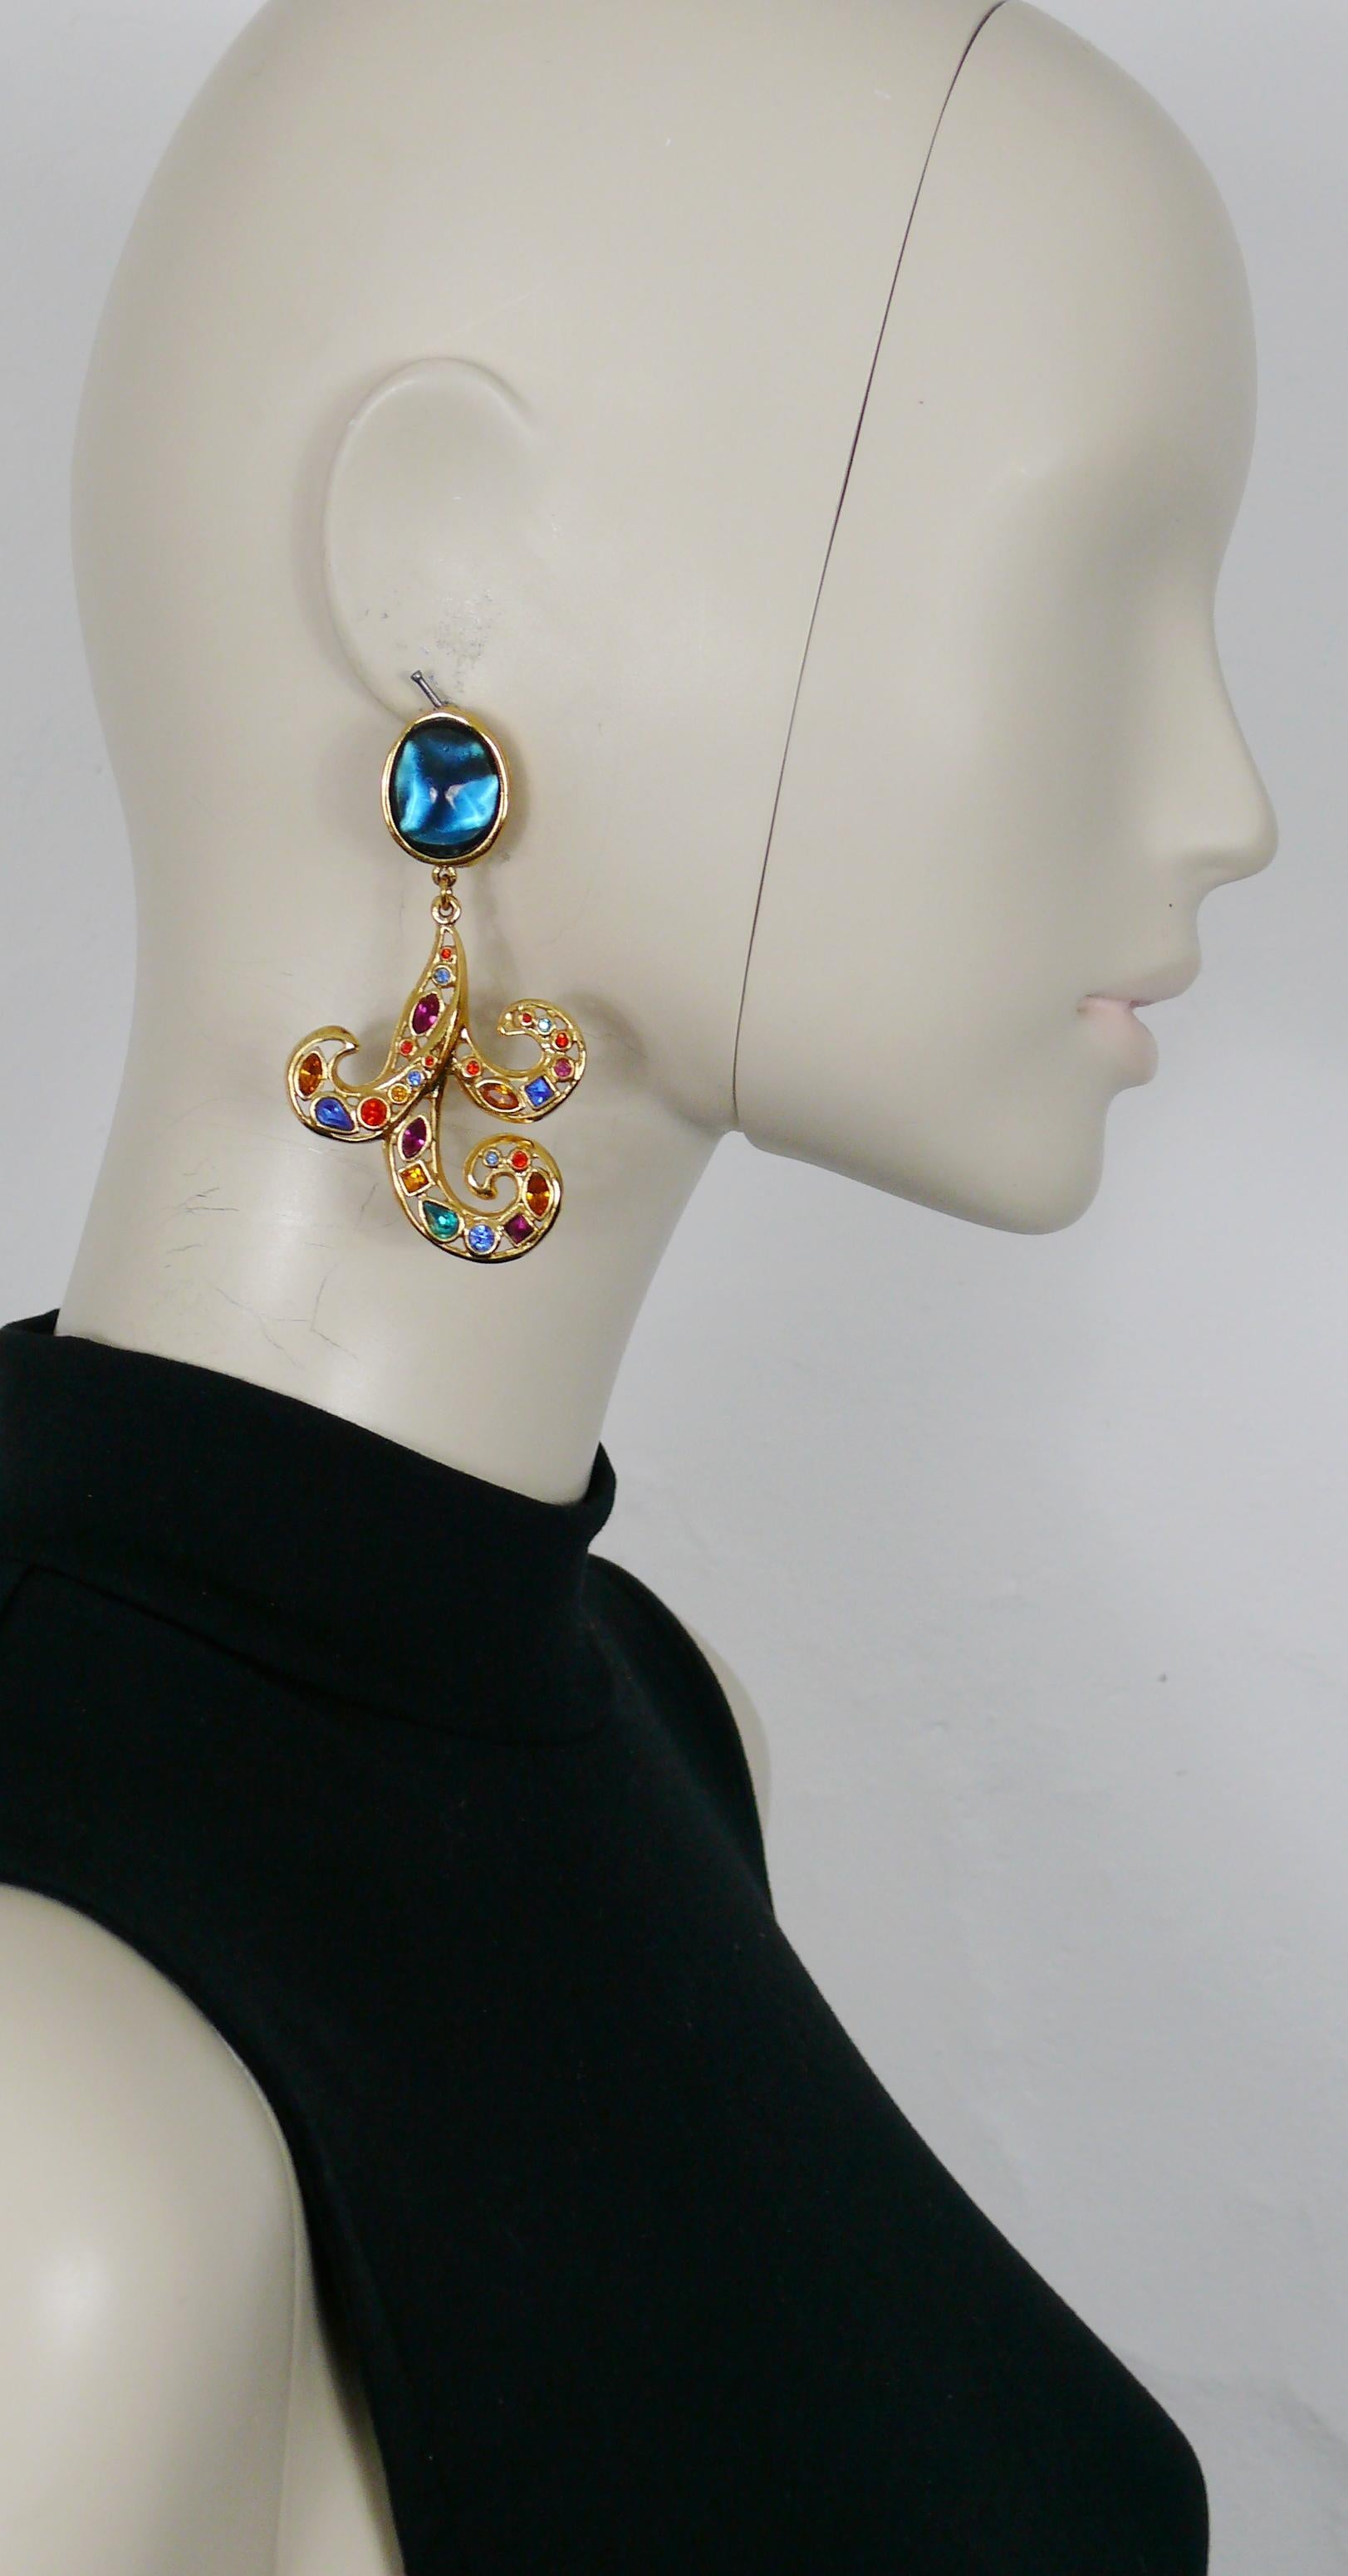 YVES SAINT LAURENT vintage gold toned dangling earrings (clip on) featuring a blue resin cabochon top and an openwork arabesque with multicolored crystal embellishement.

Embossed YSL Made in France.

Indicative measurements : max. height 8.2 cm